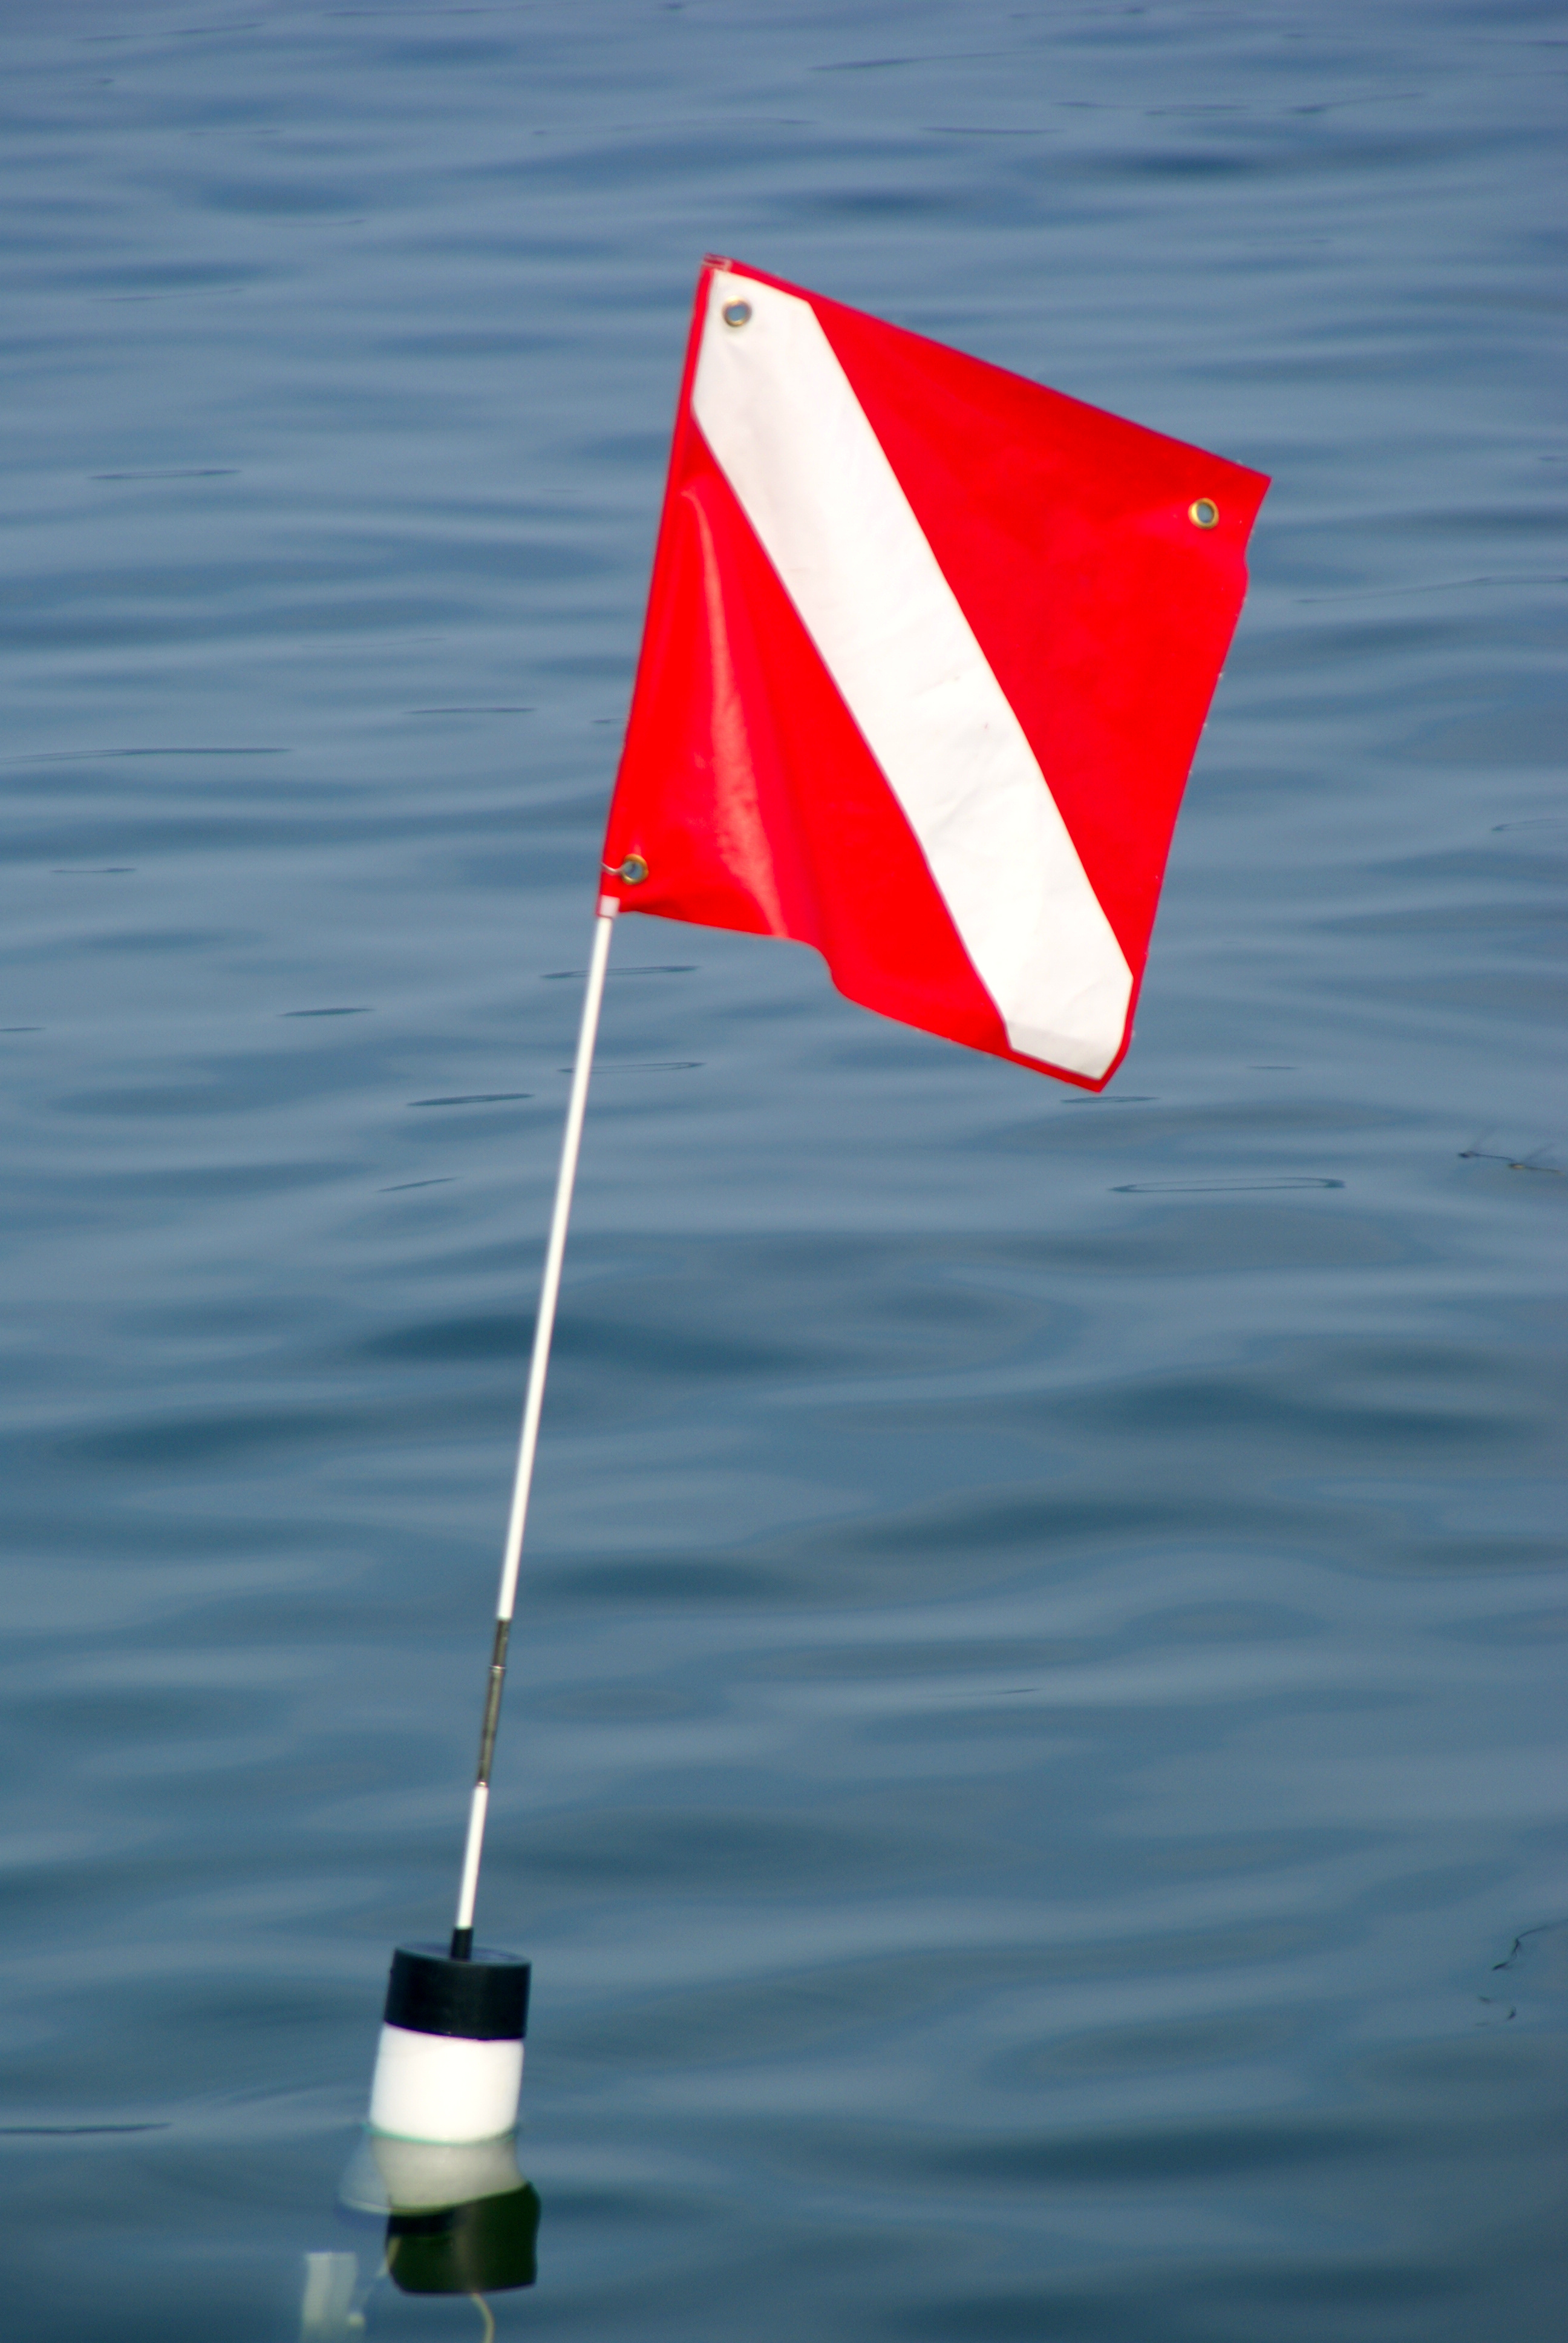 Floating surface marker buoy with attached dive flag used by scuba divers performing search missions